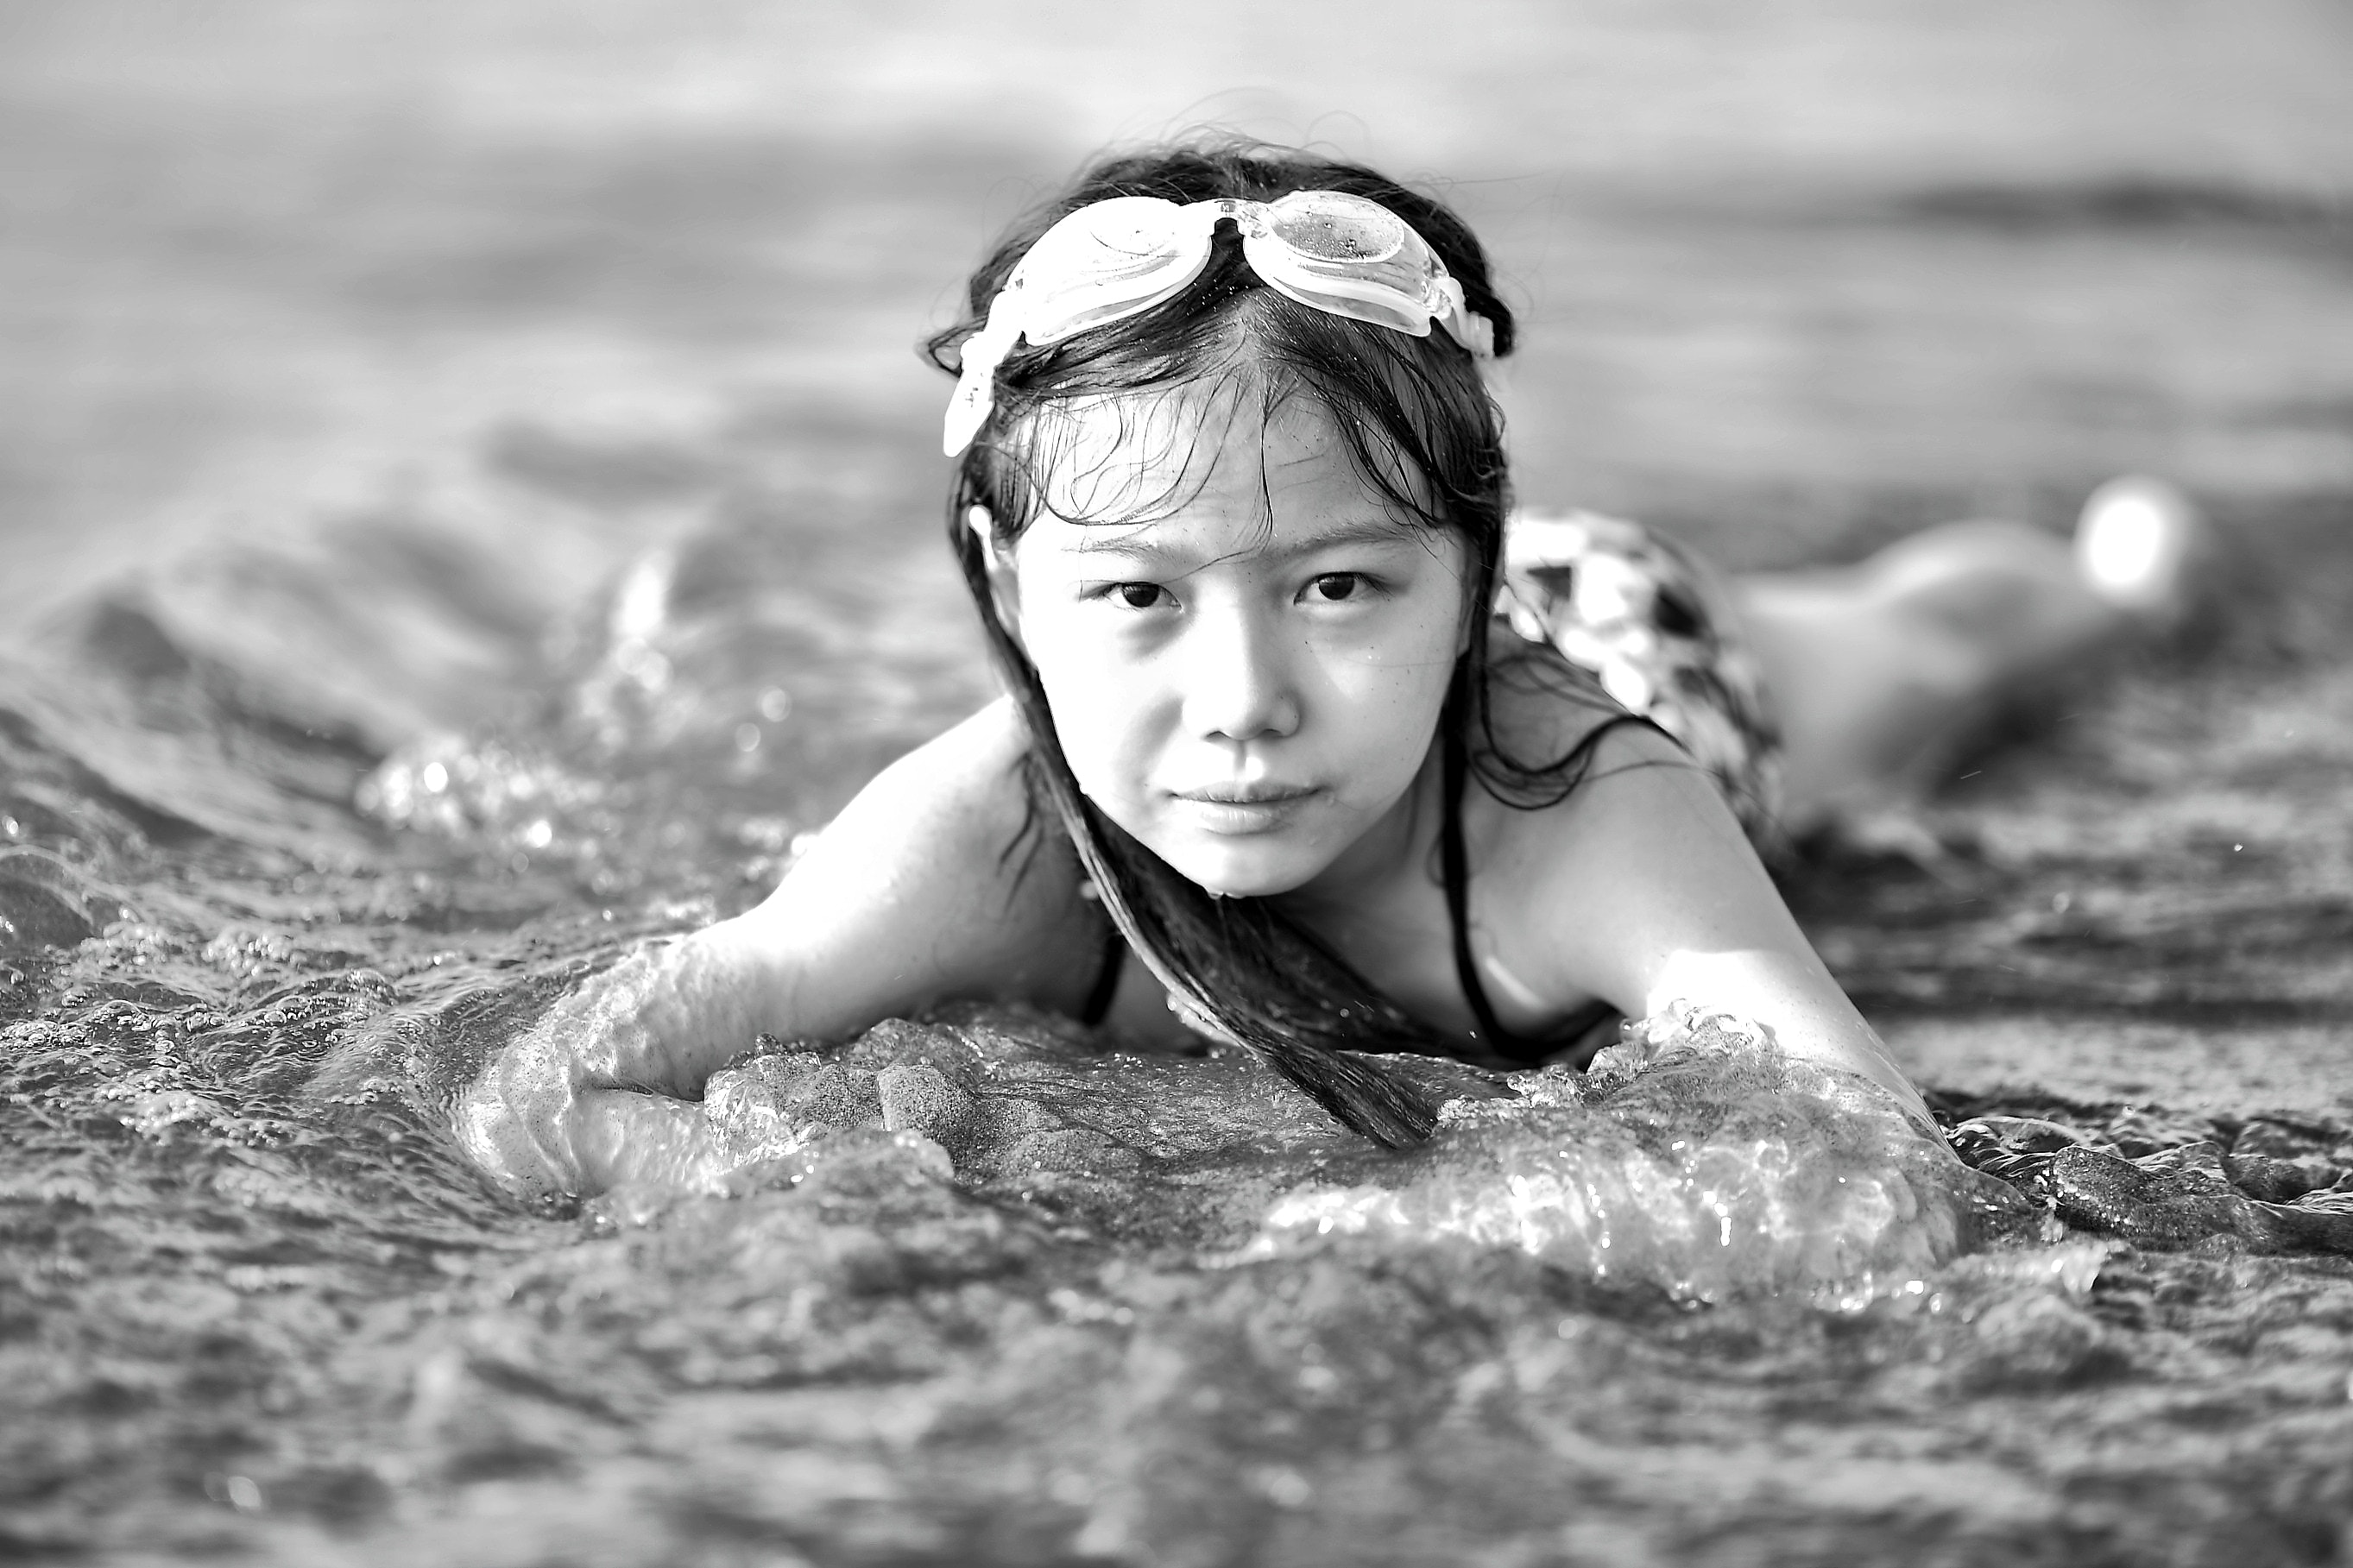 Girl wearing goggles on beach in black and white photo